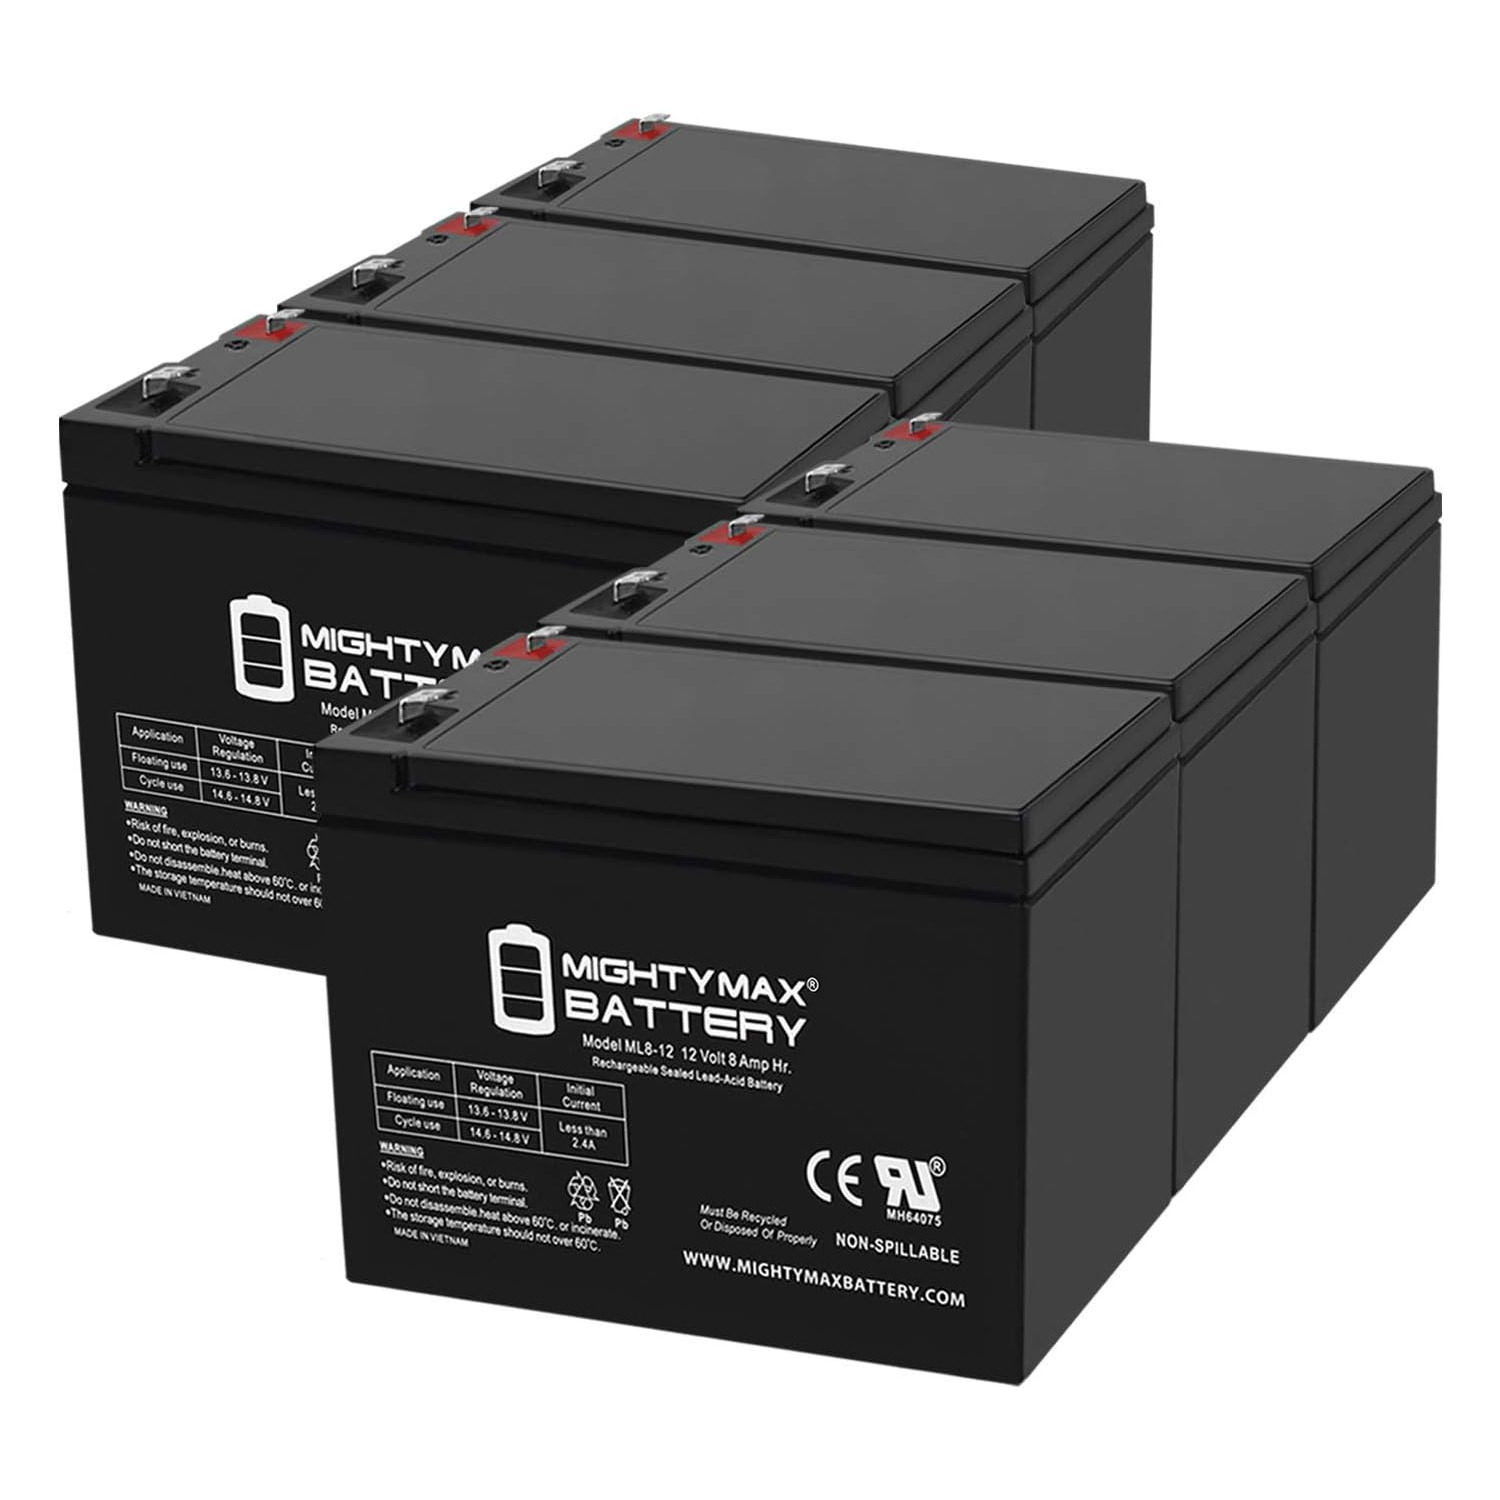 12V 8Ah Replacement Battery compatible with Belkin F6C500-SER-SB 12V 7.5Ah UPS Battery Replacement - 6 Pack